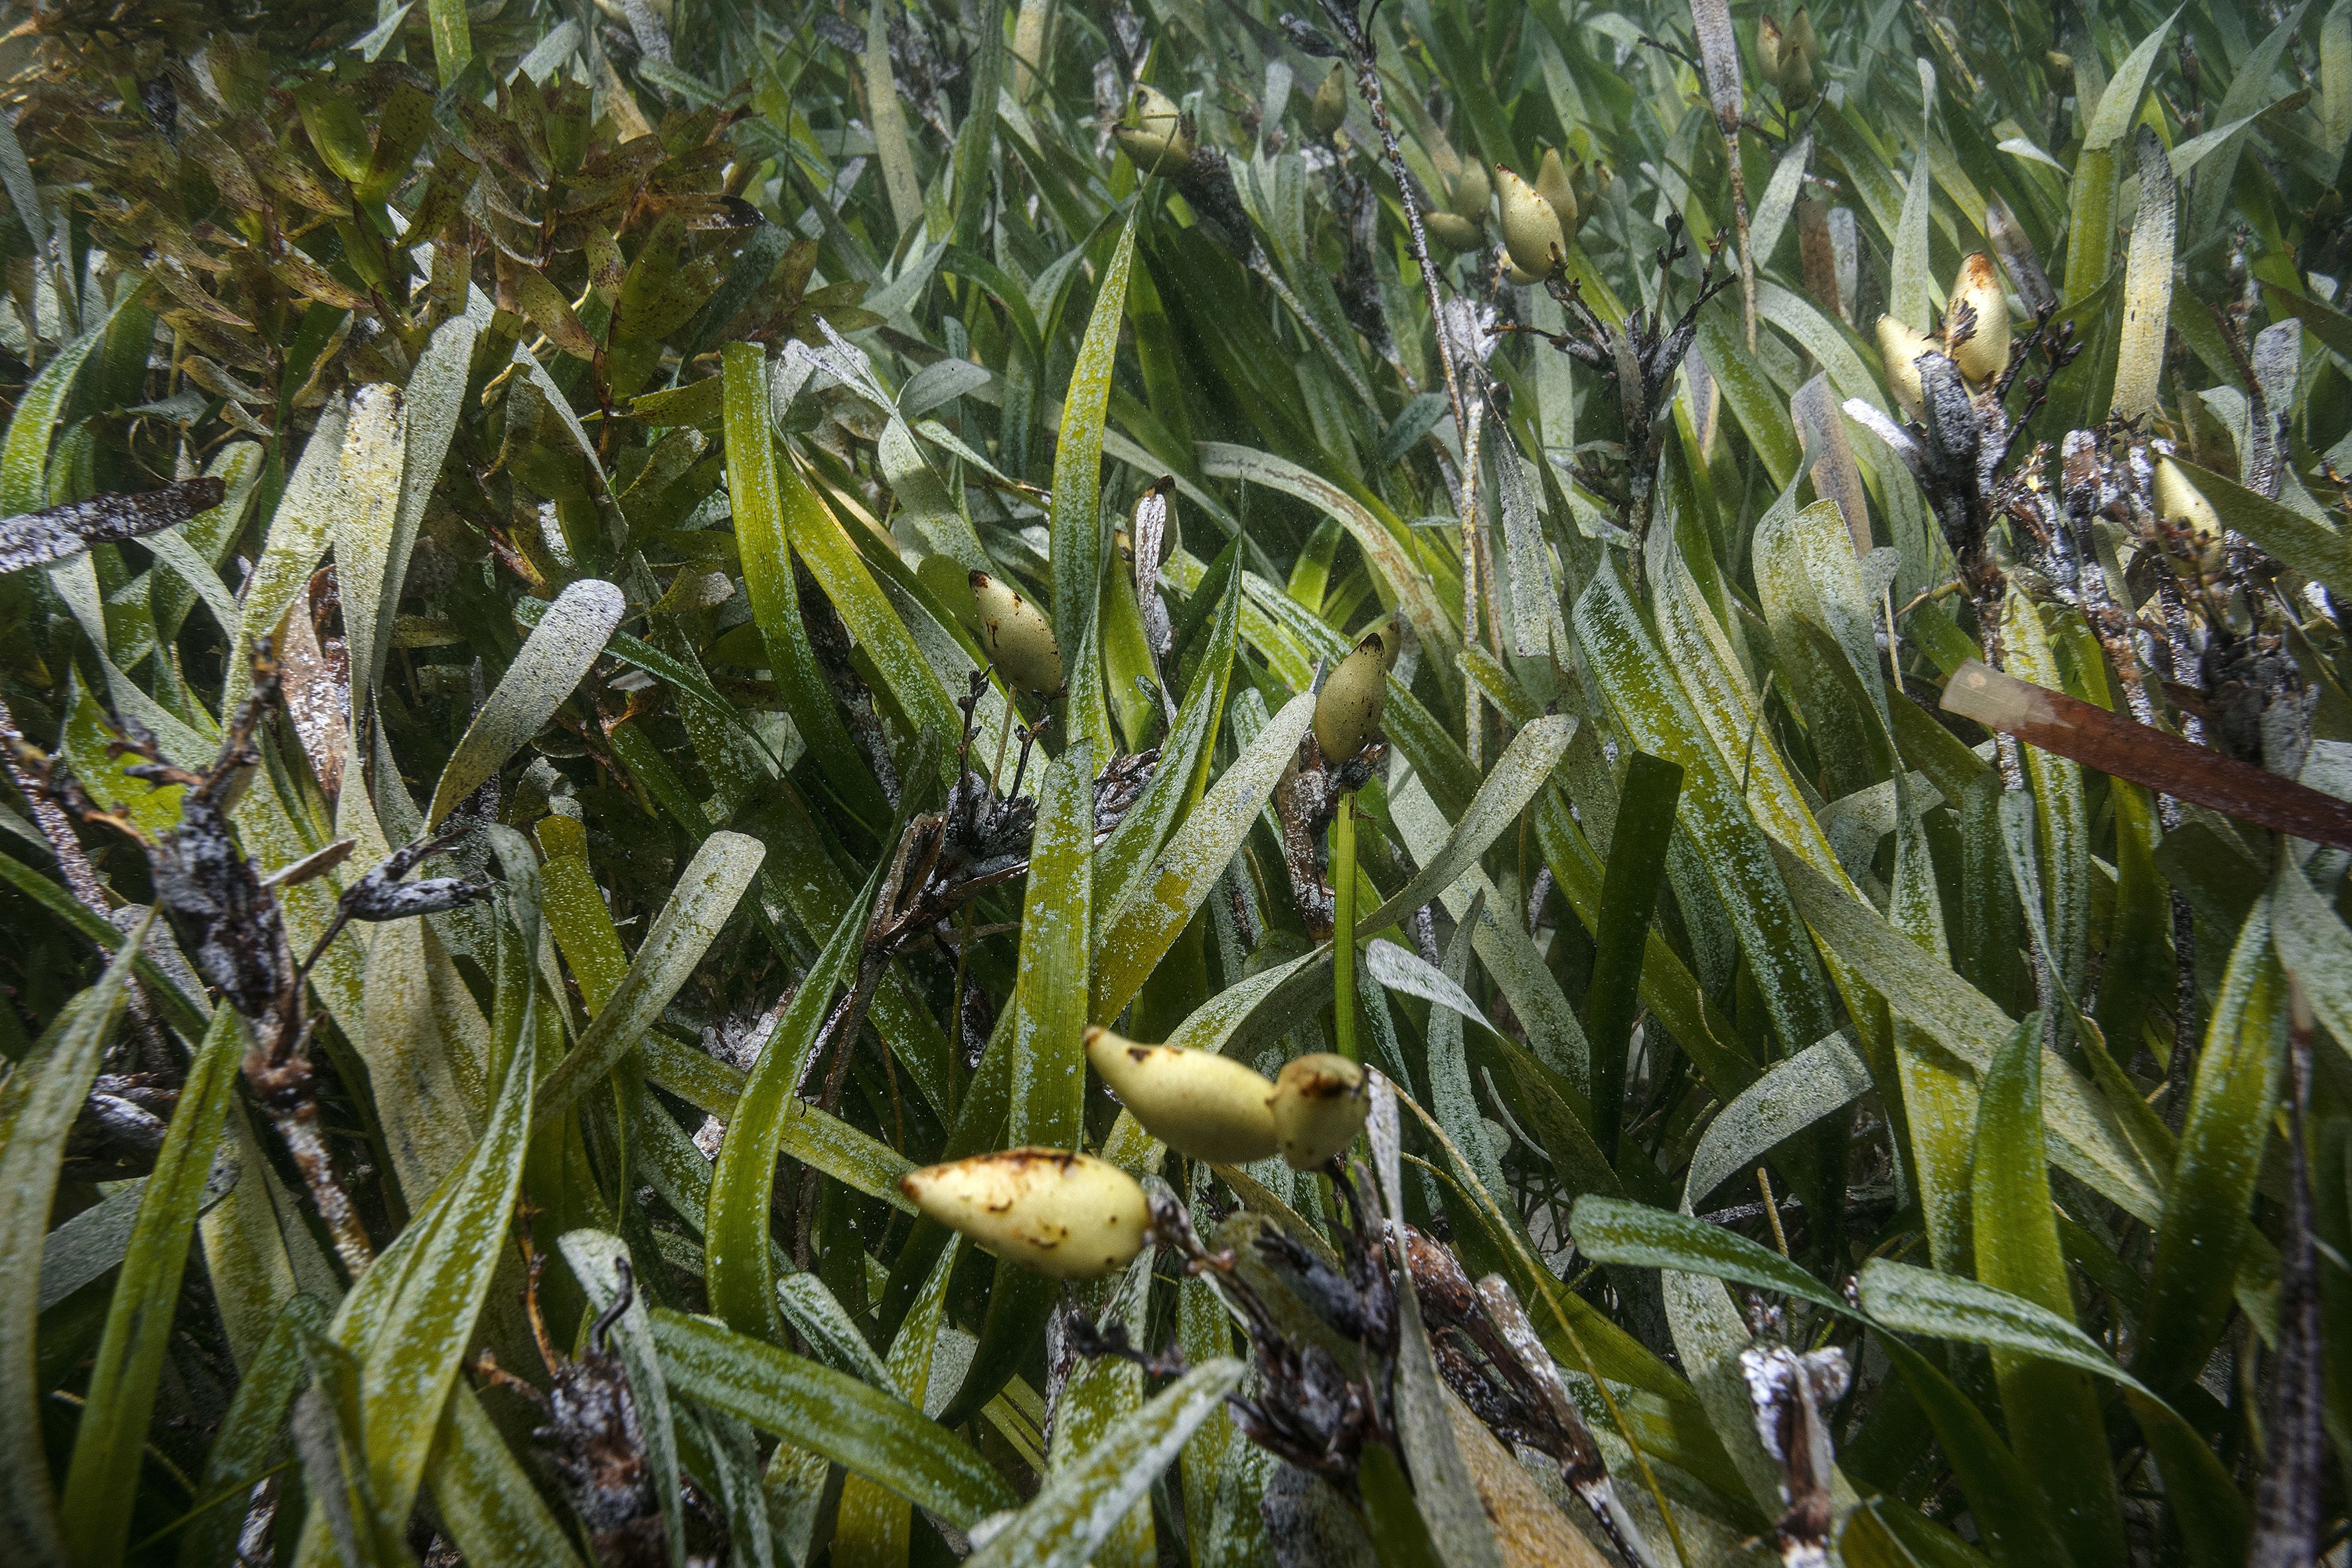 underwater green grass with broad leaves